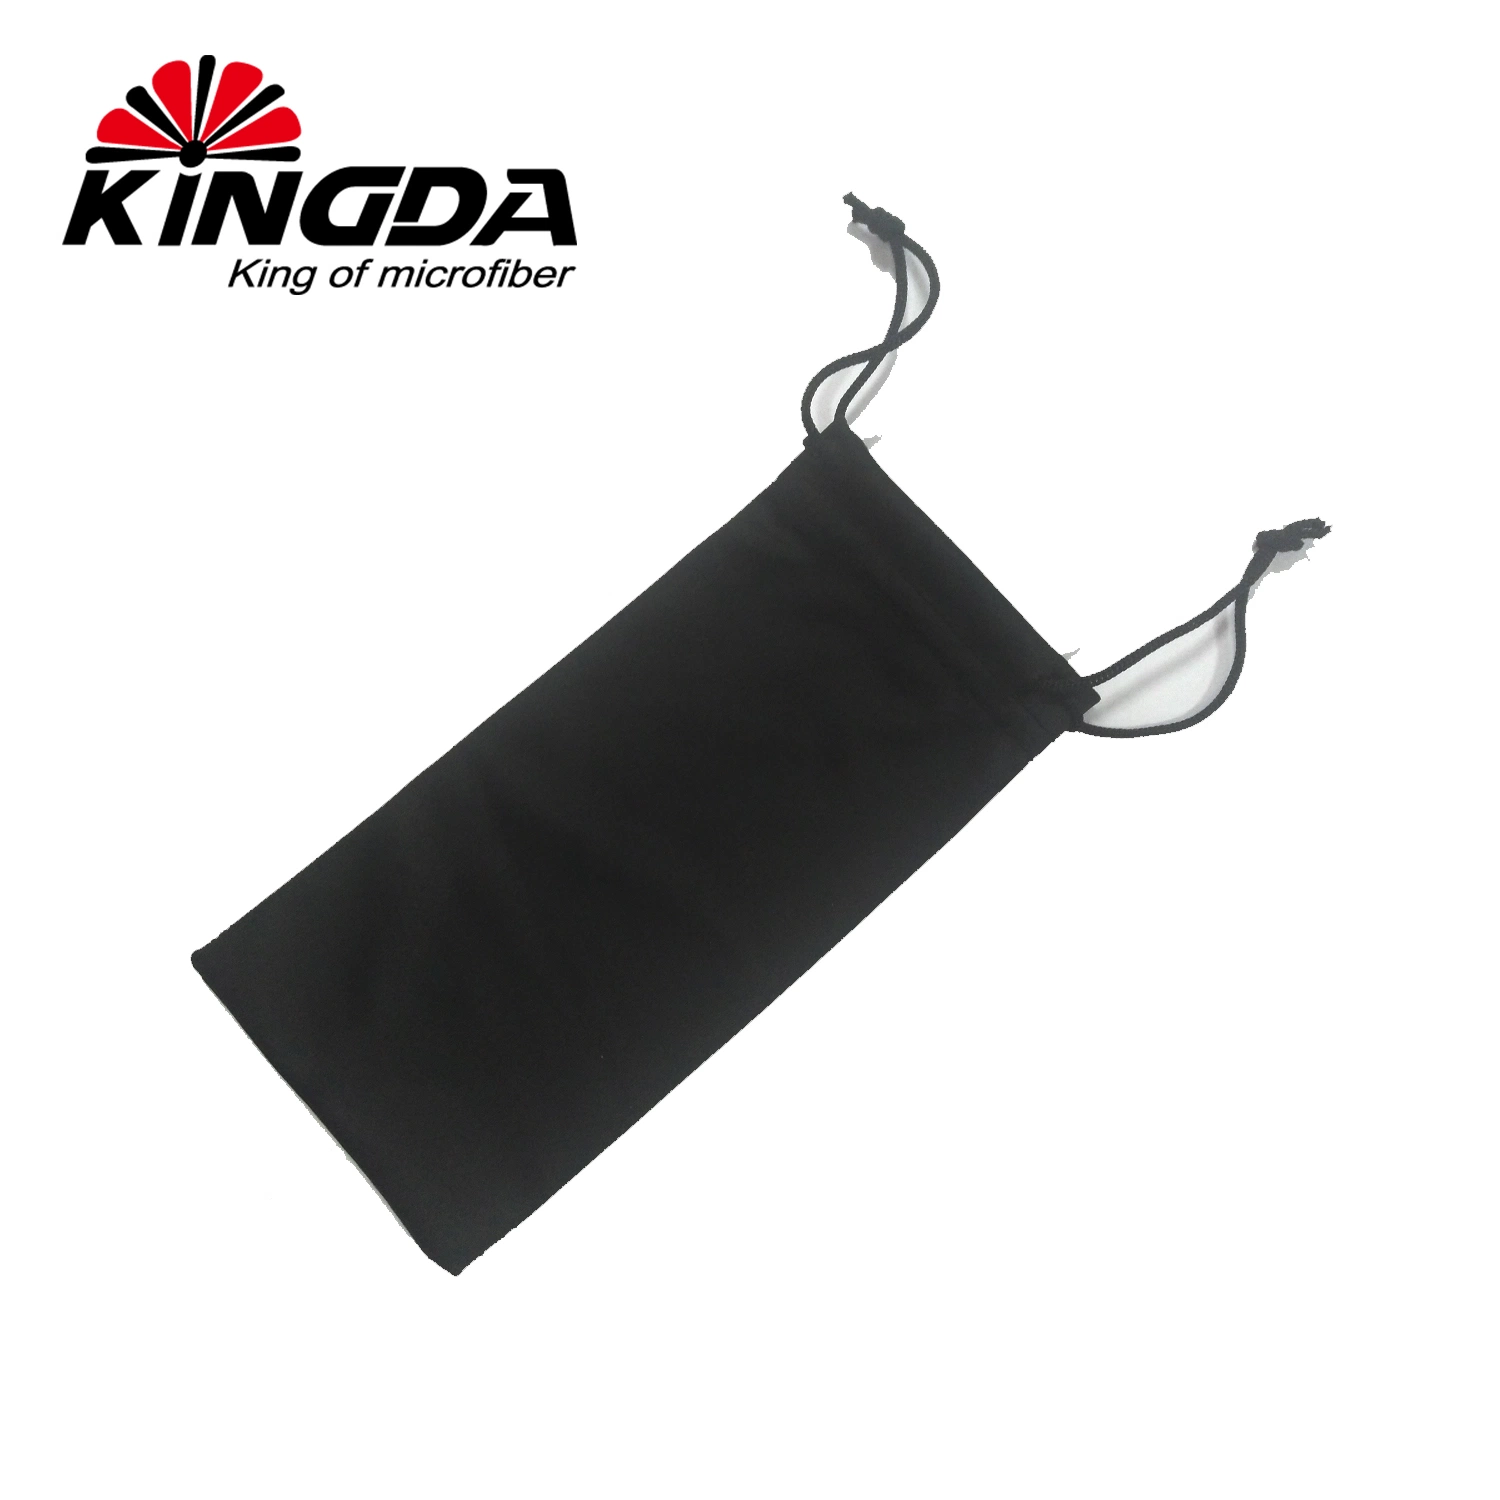 Digital Products Bags, Soft Touch Microfiber Bags with Logo Printing for Digital Products